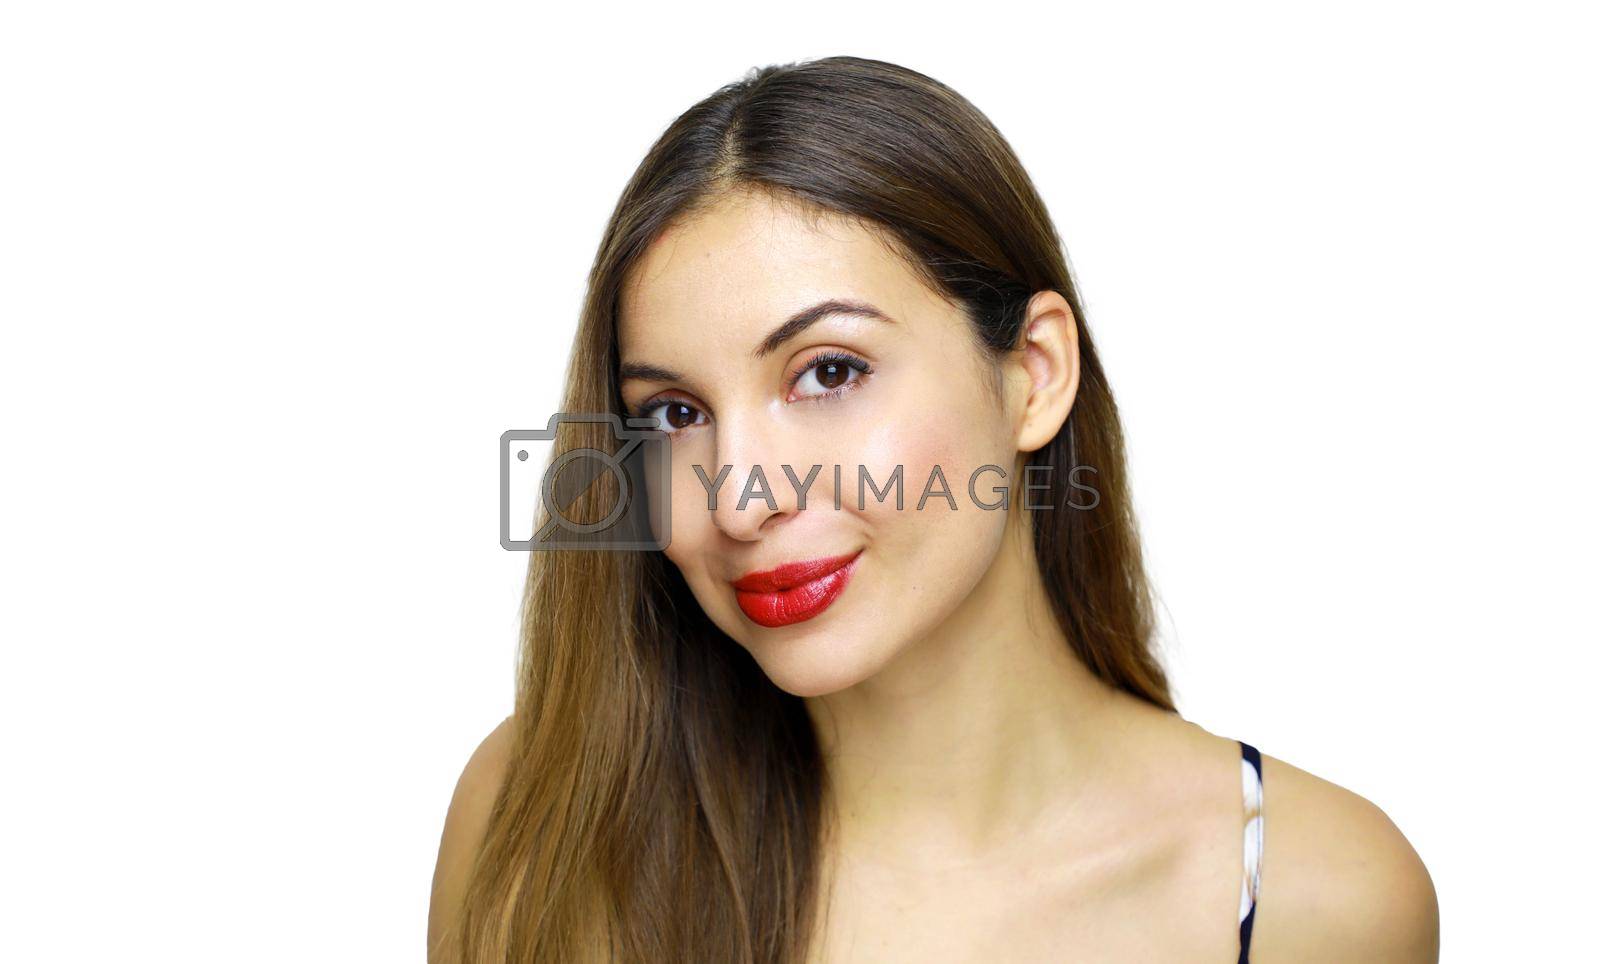 Royalty free image of Close-up of beautiful woman with red lipstick by sergio_monti